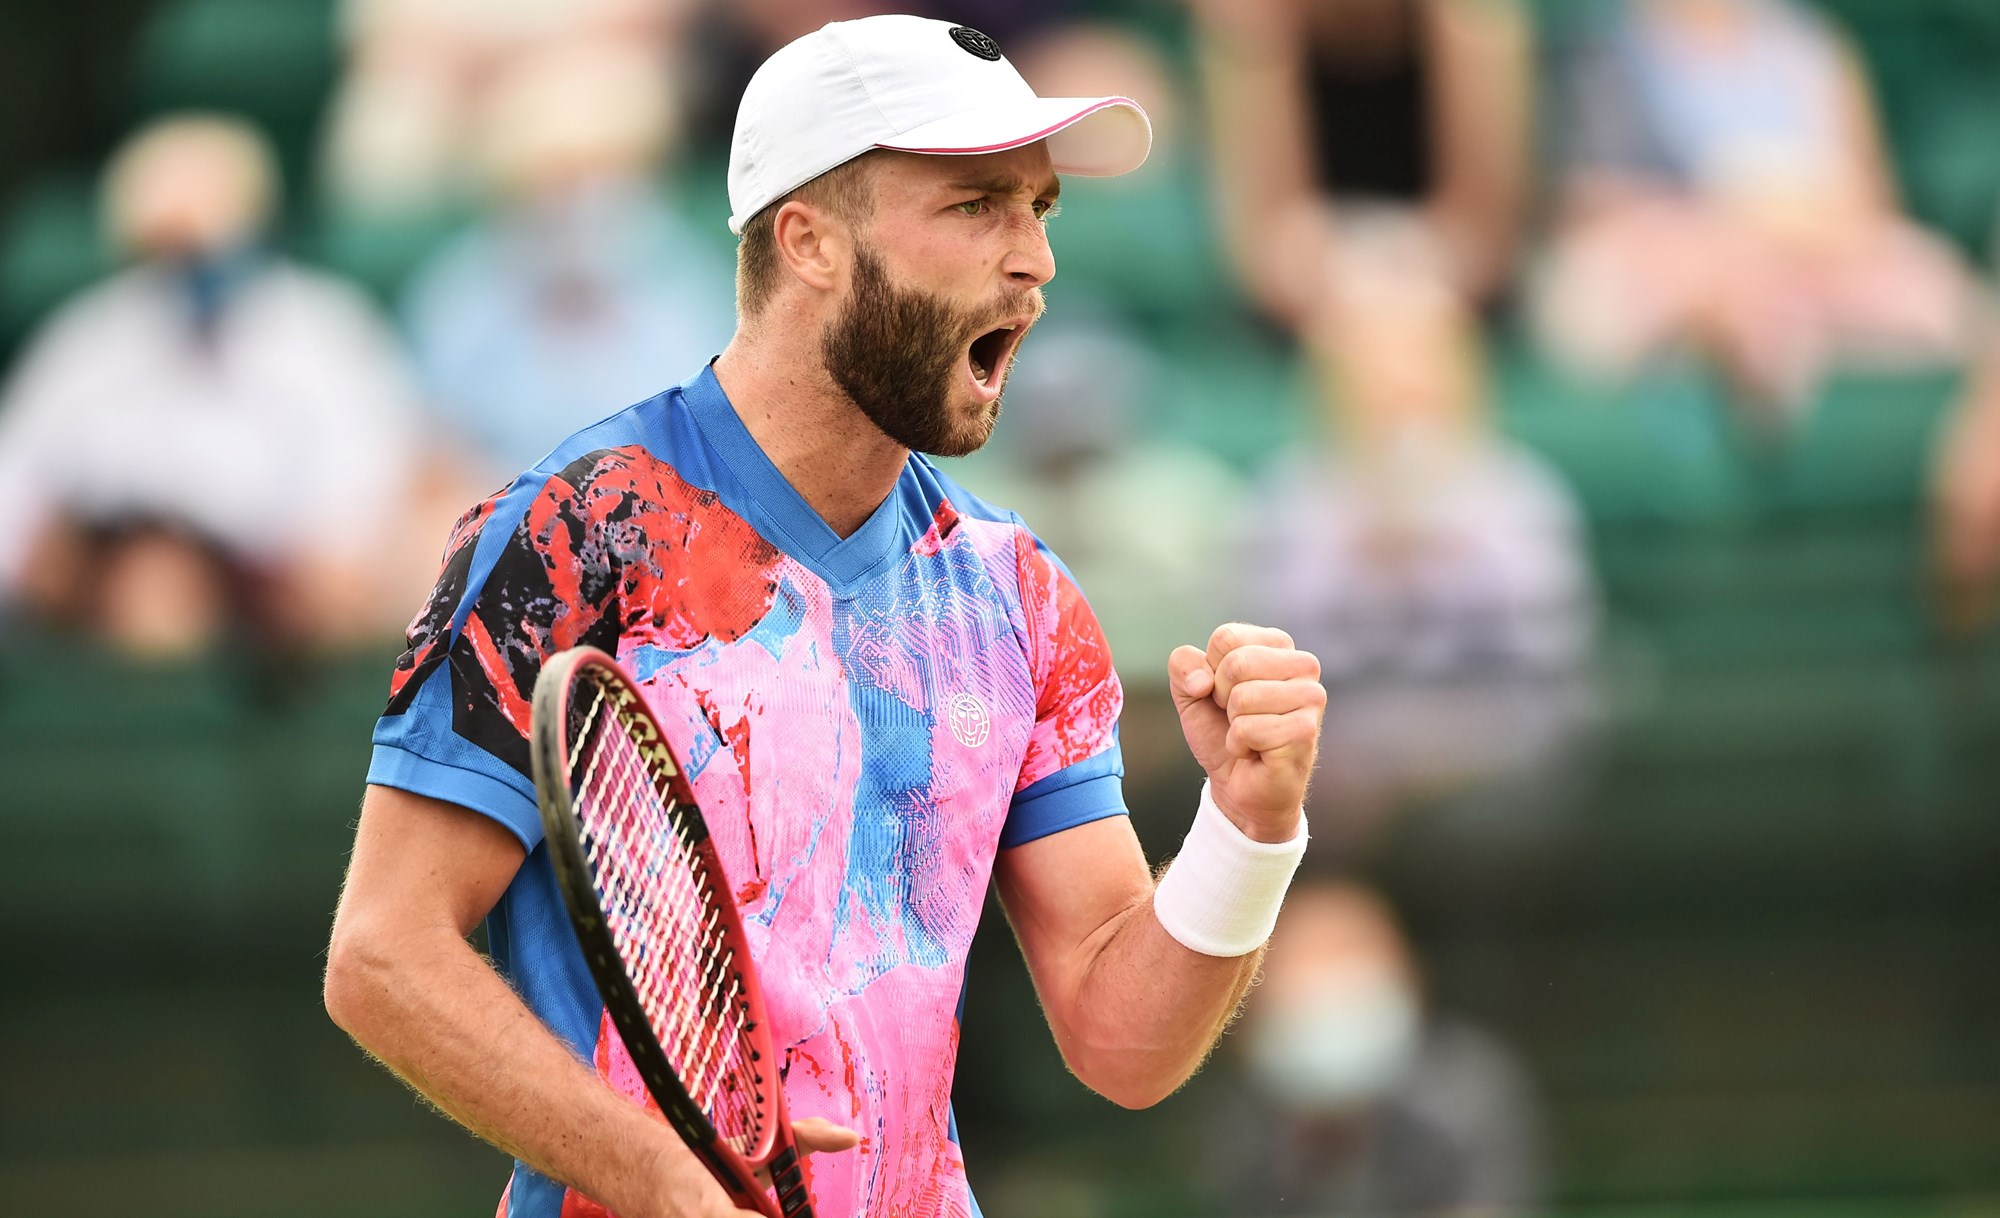 Liam Broady celebrates as he wins a point on day five of the Nottingham Open 2021